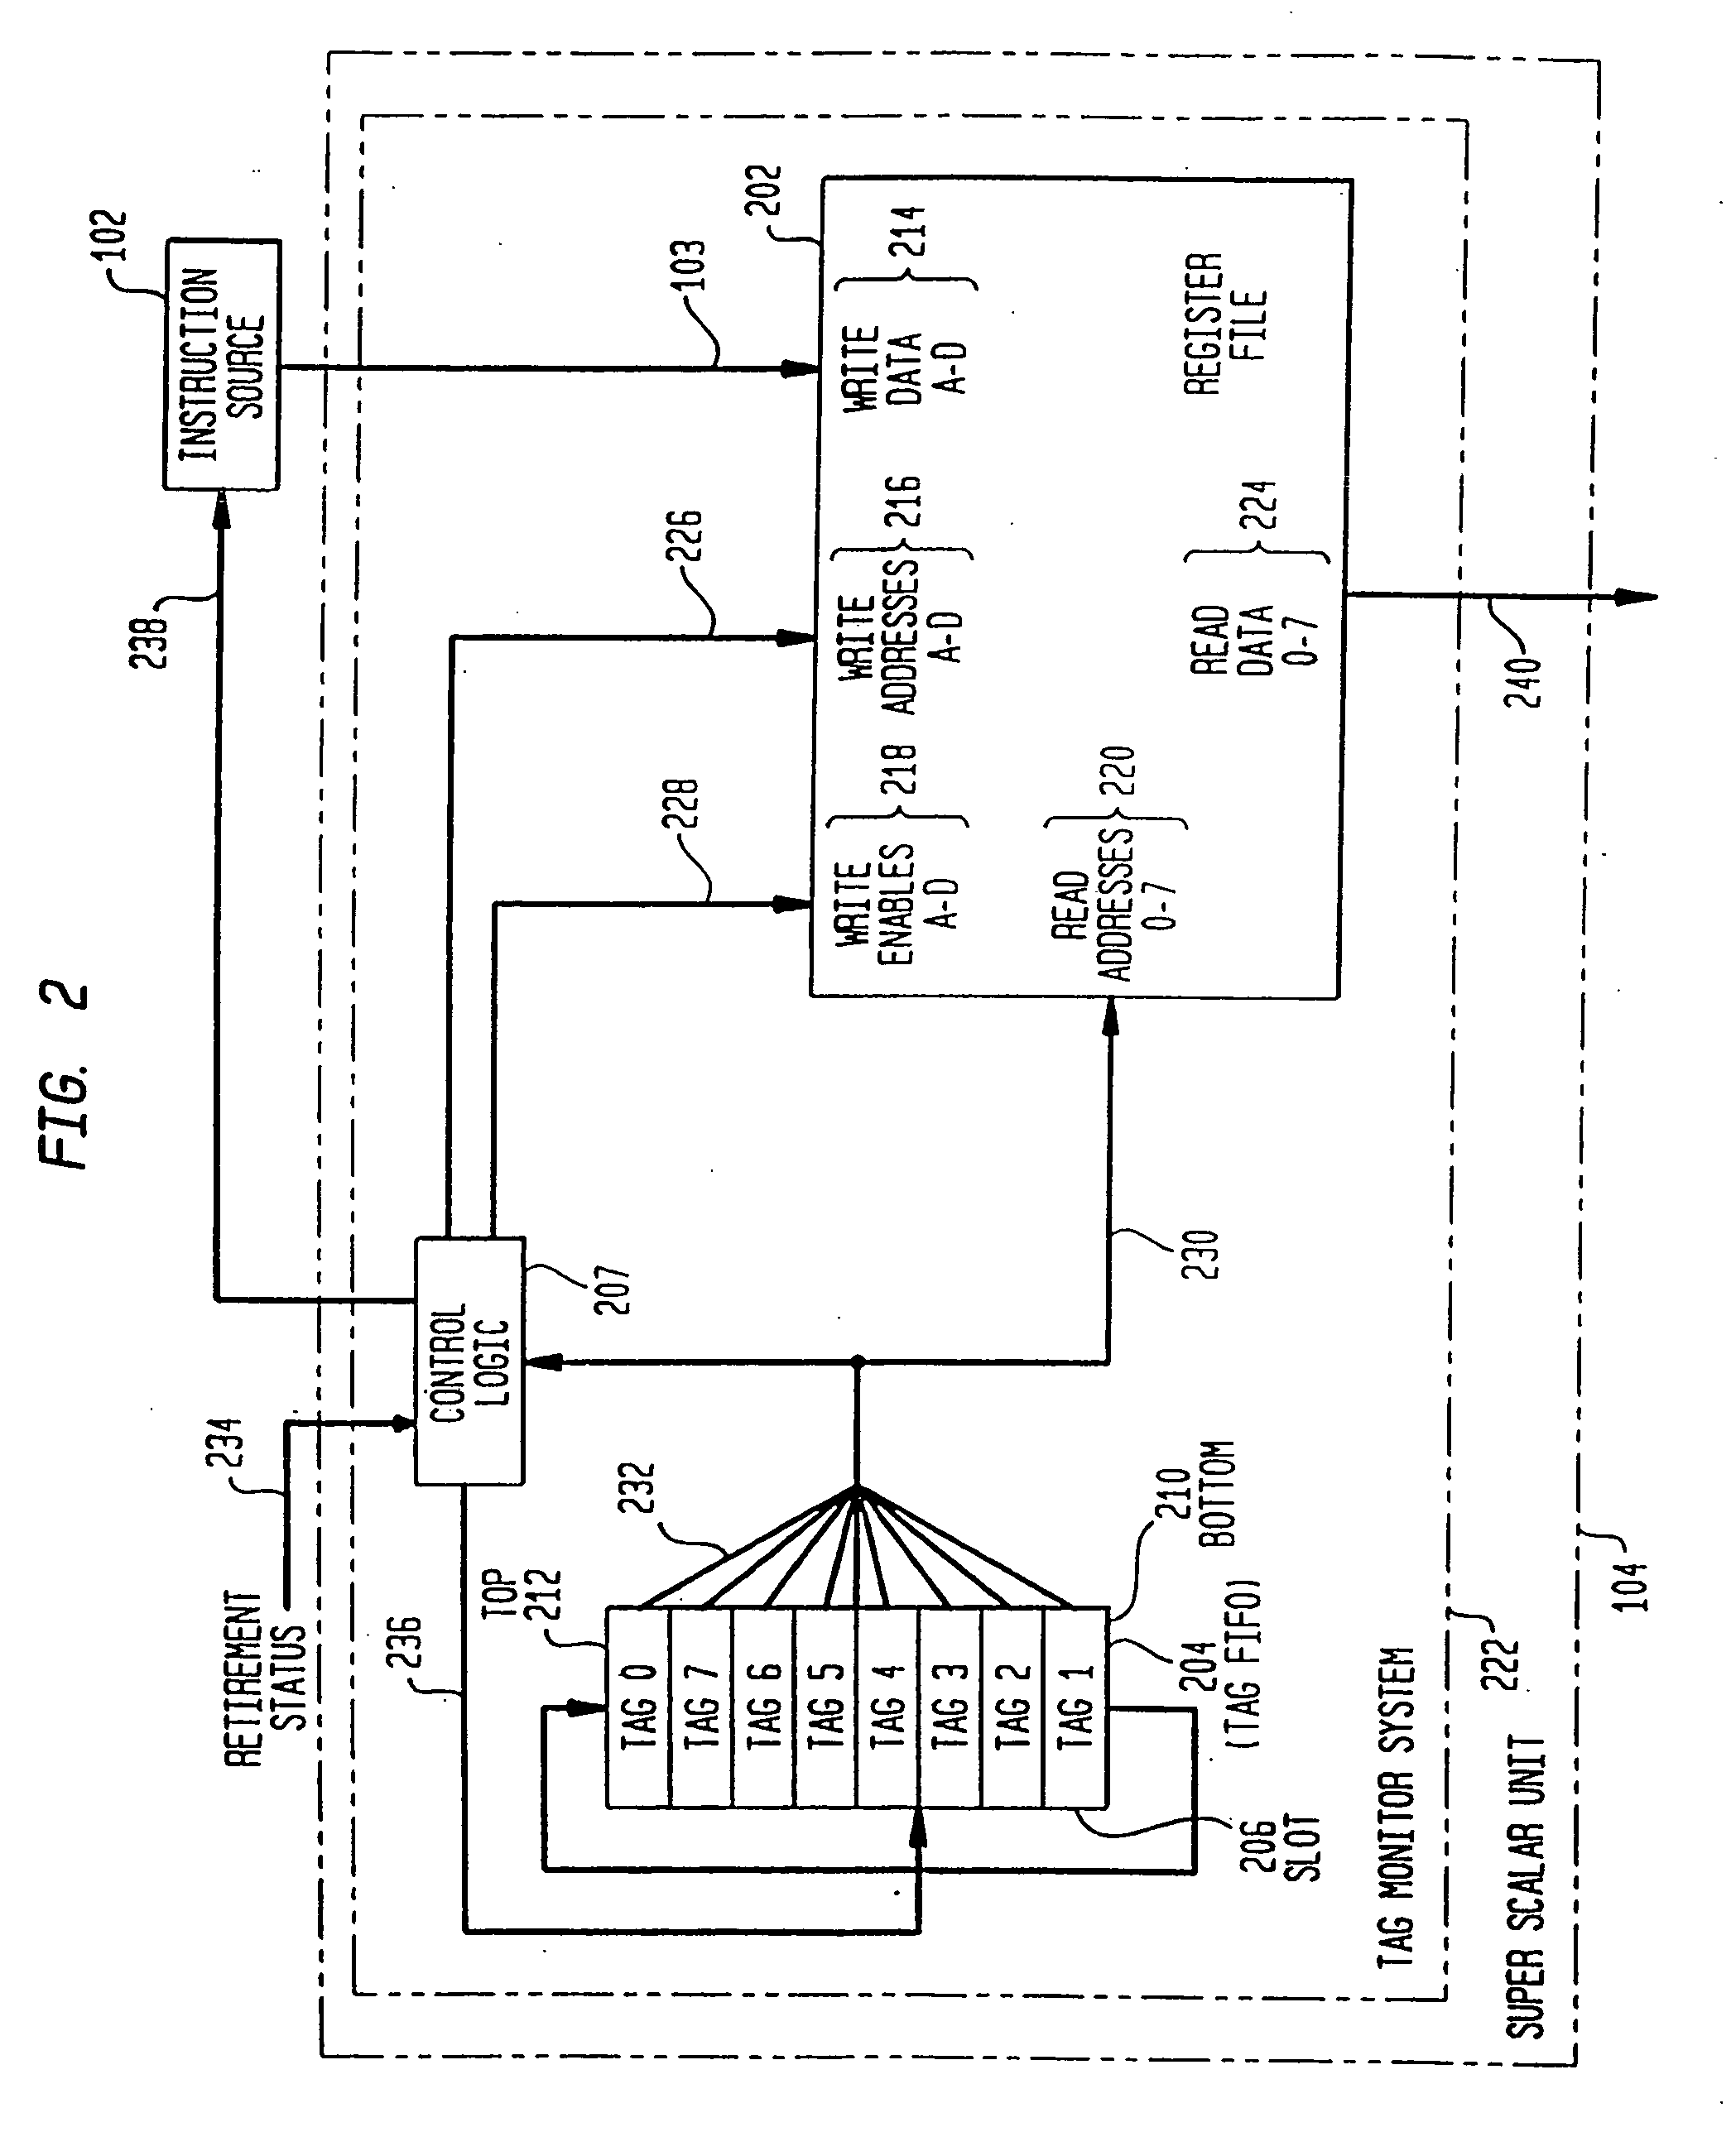 System and method for assigning tags to control instruction processing in a superscalar processor